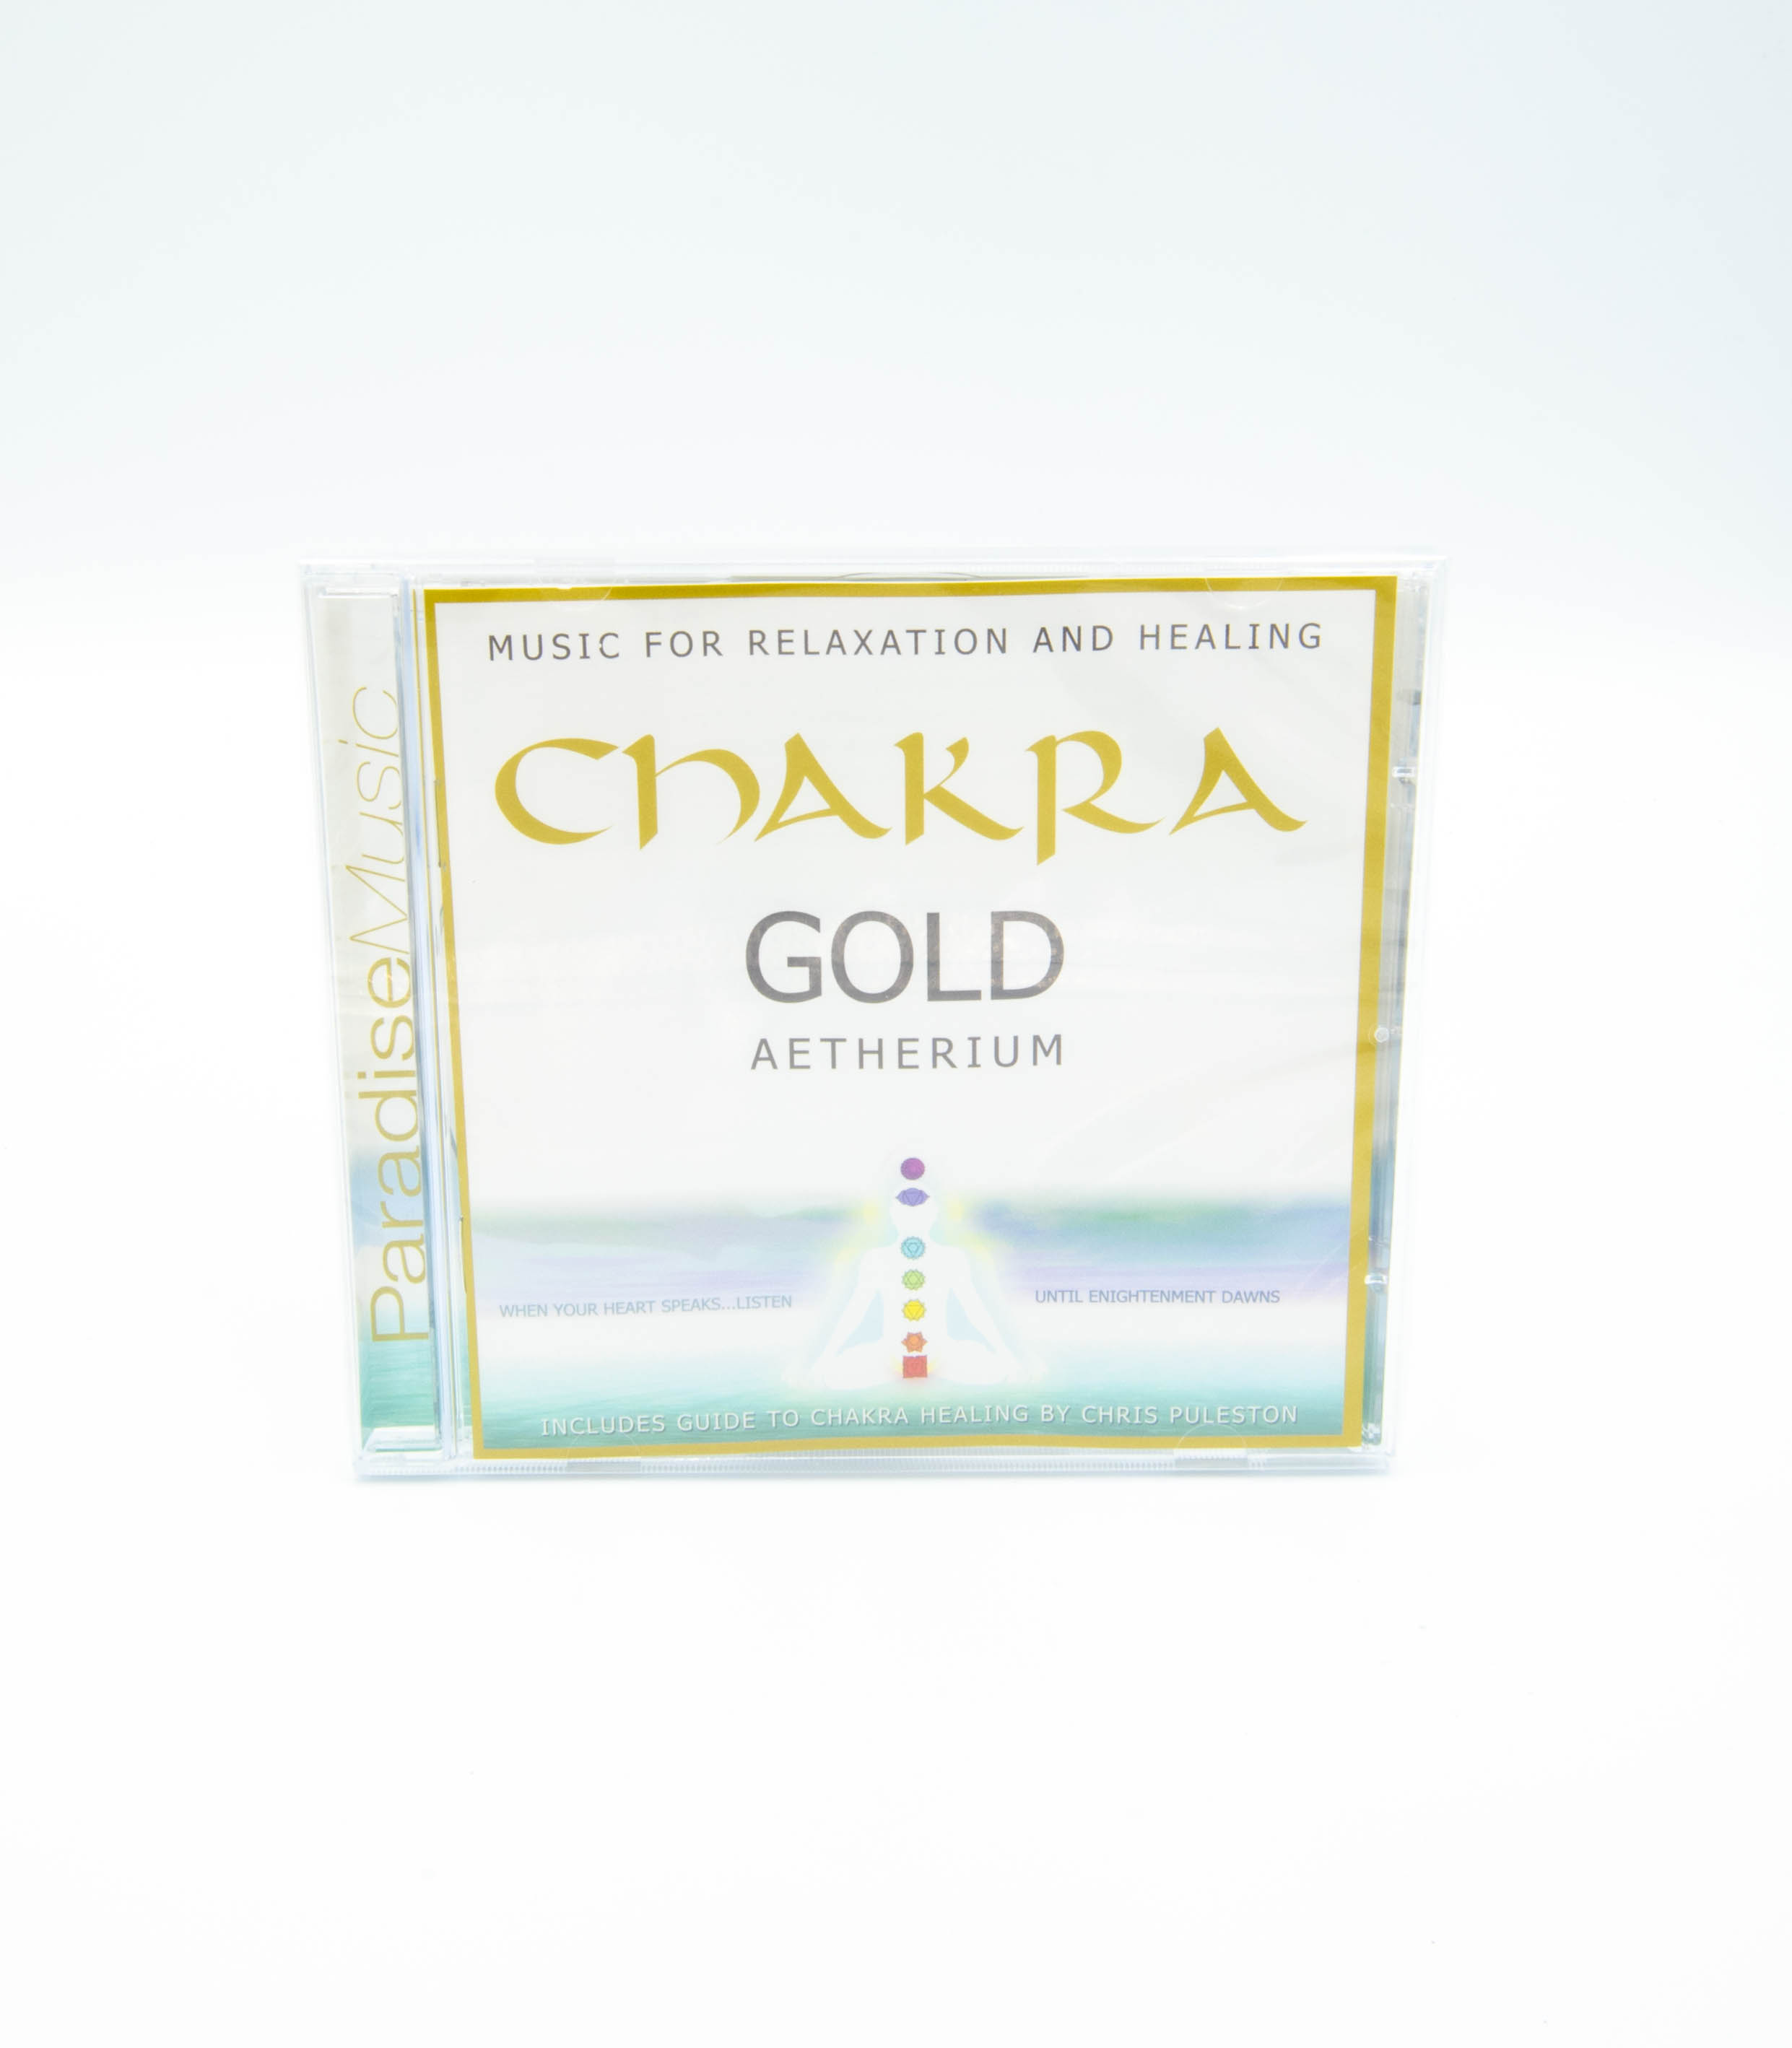 Chakra Gold Aetherium Music for Relaxing and Healing